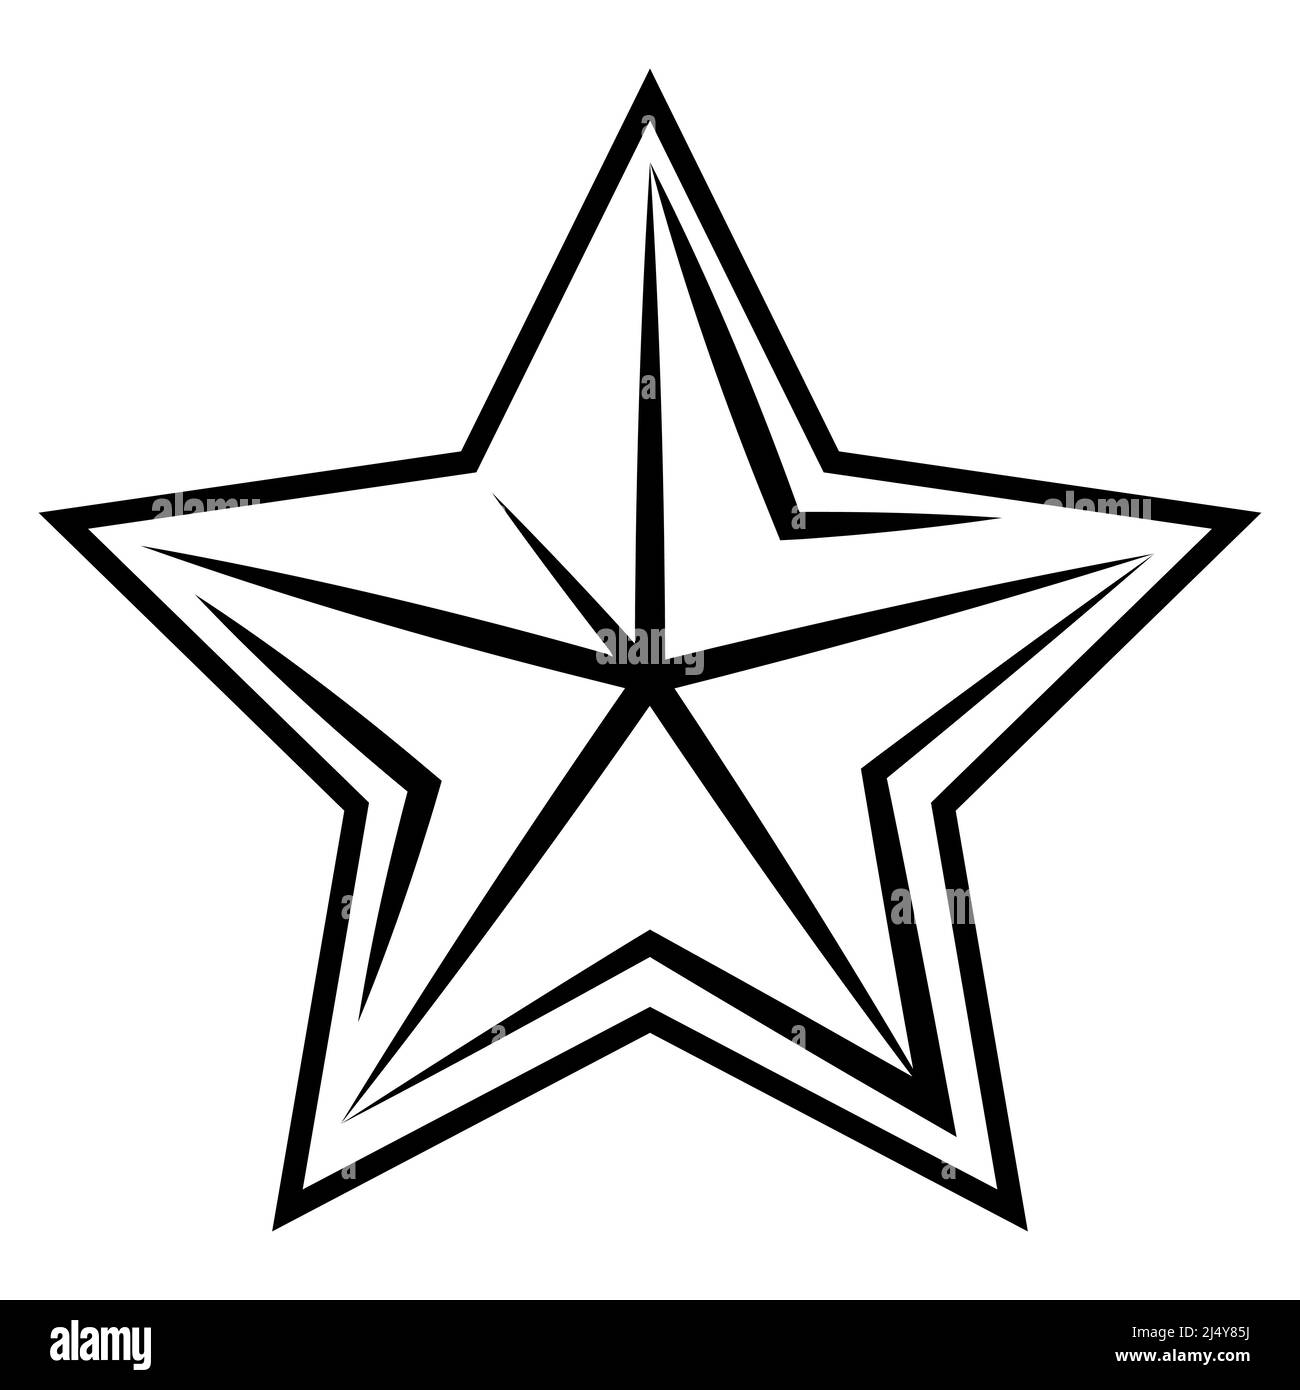 Vintage decorative star. Icon in abstract style. Decorative element for design. Stock Vector